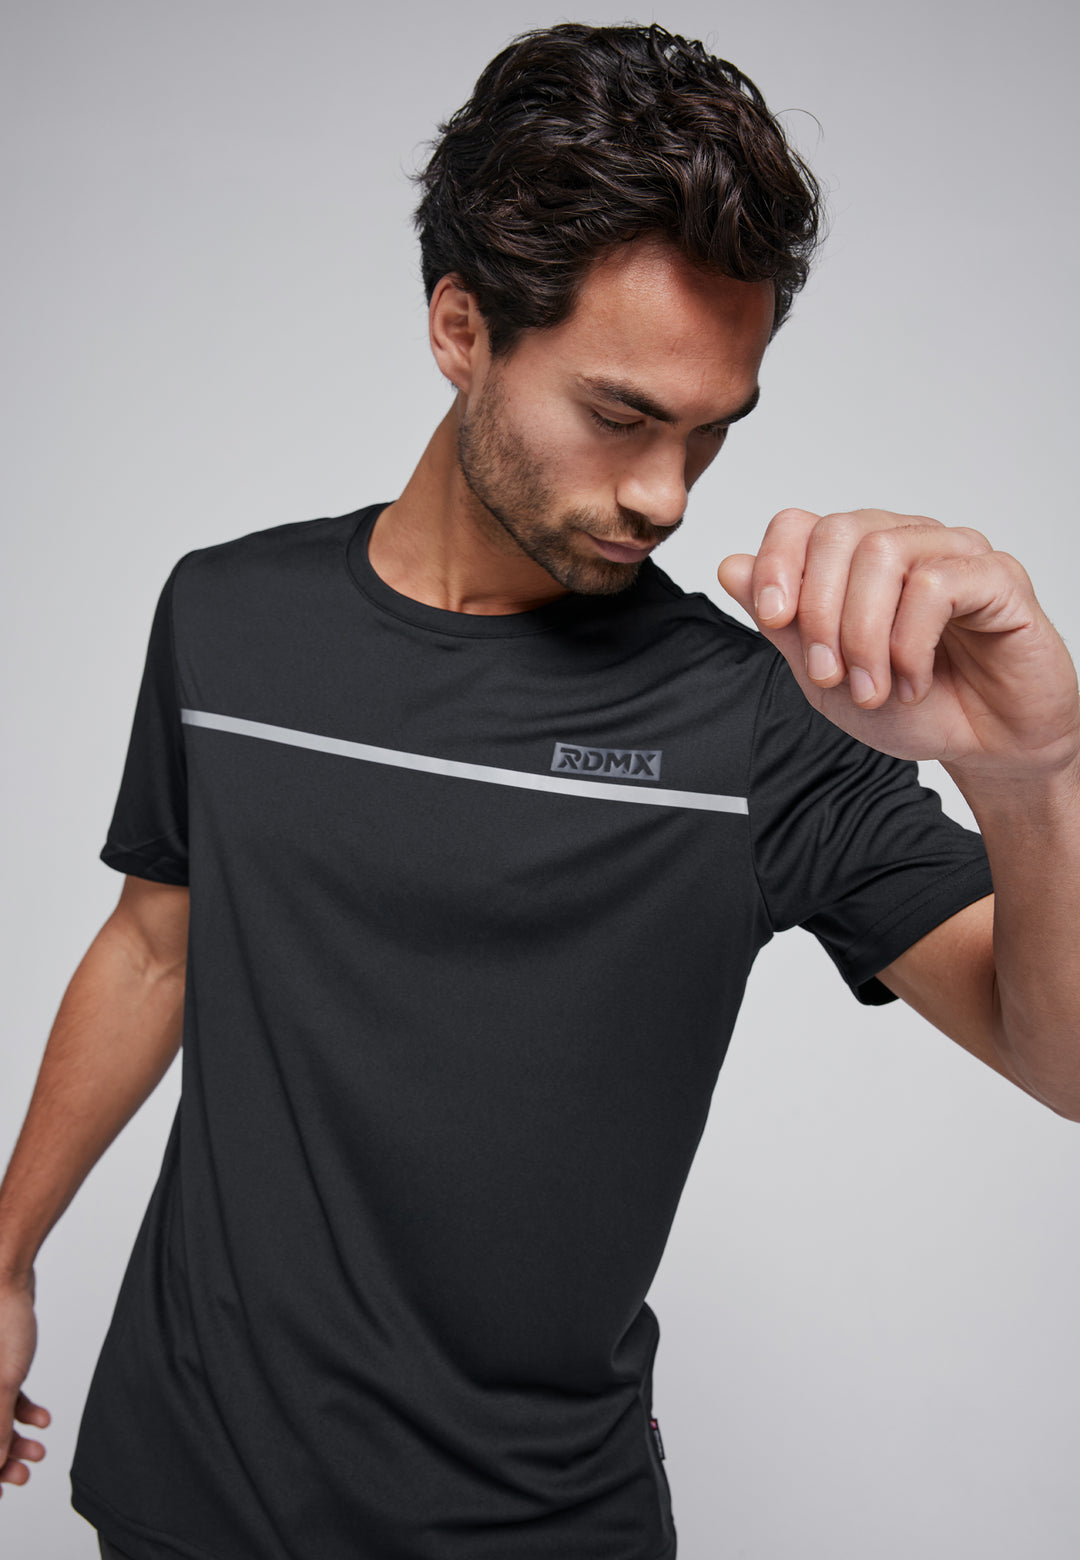 Men's sports shirt Dry-Cool - sustainable